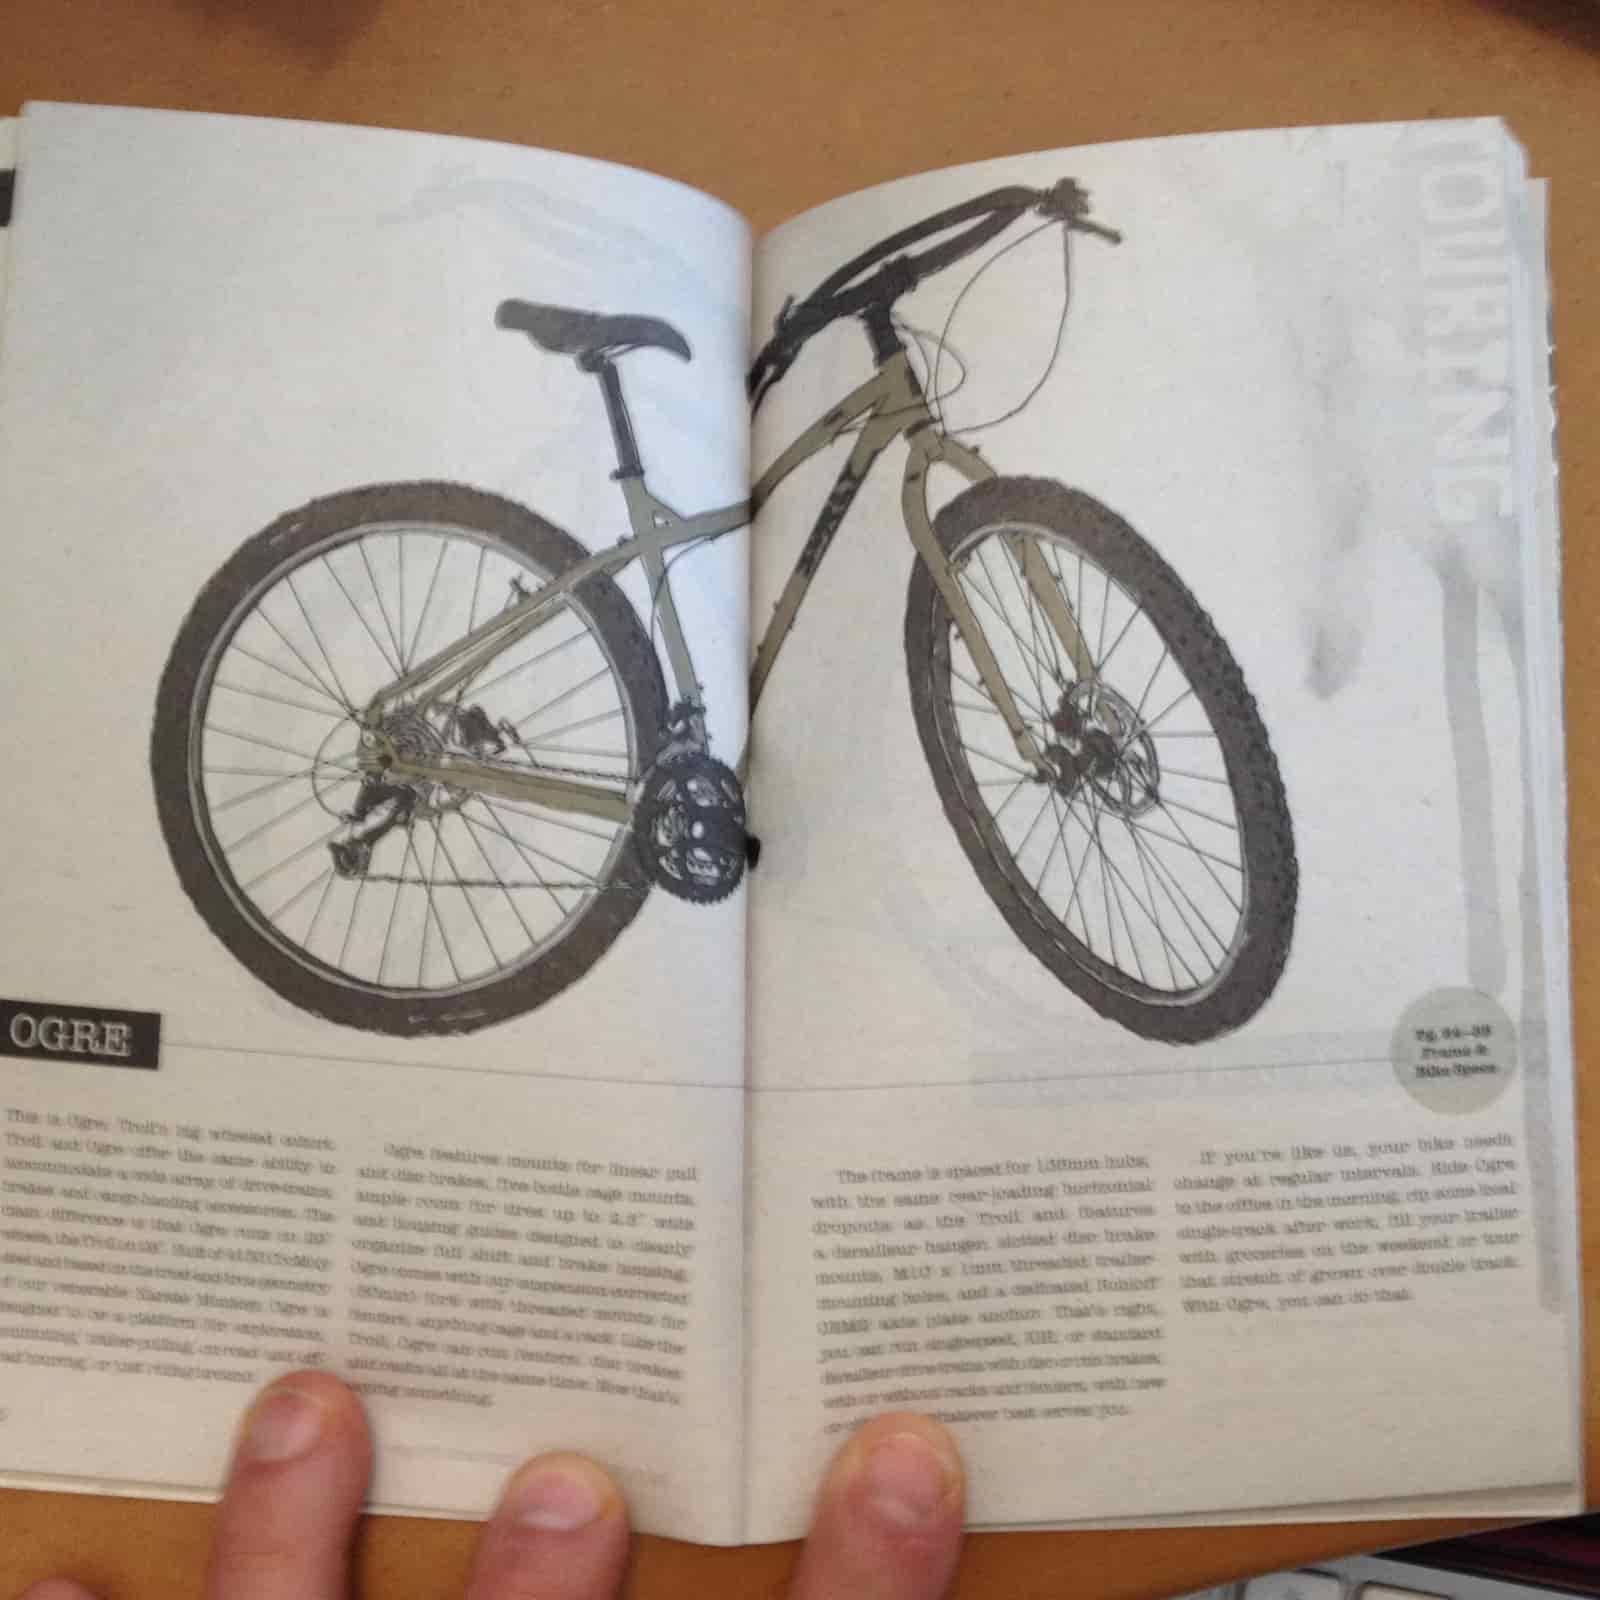 Downward view of an open catalog spread, showing a Surly Ogre bike above and text below